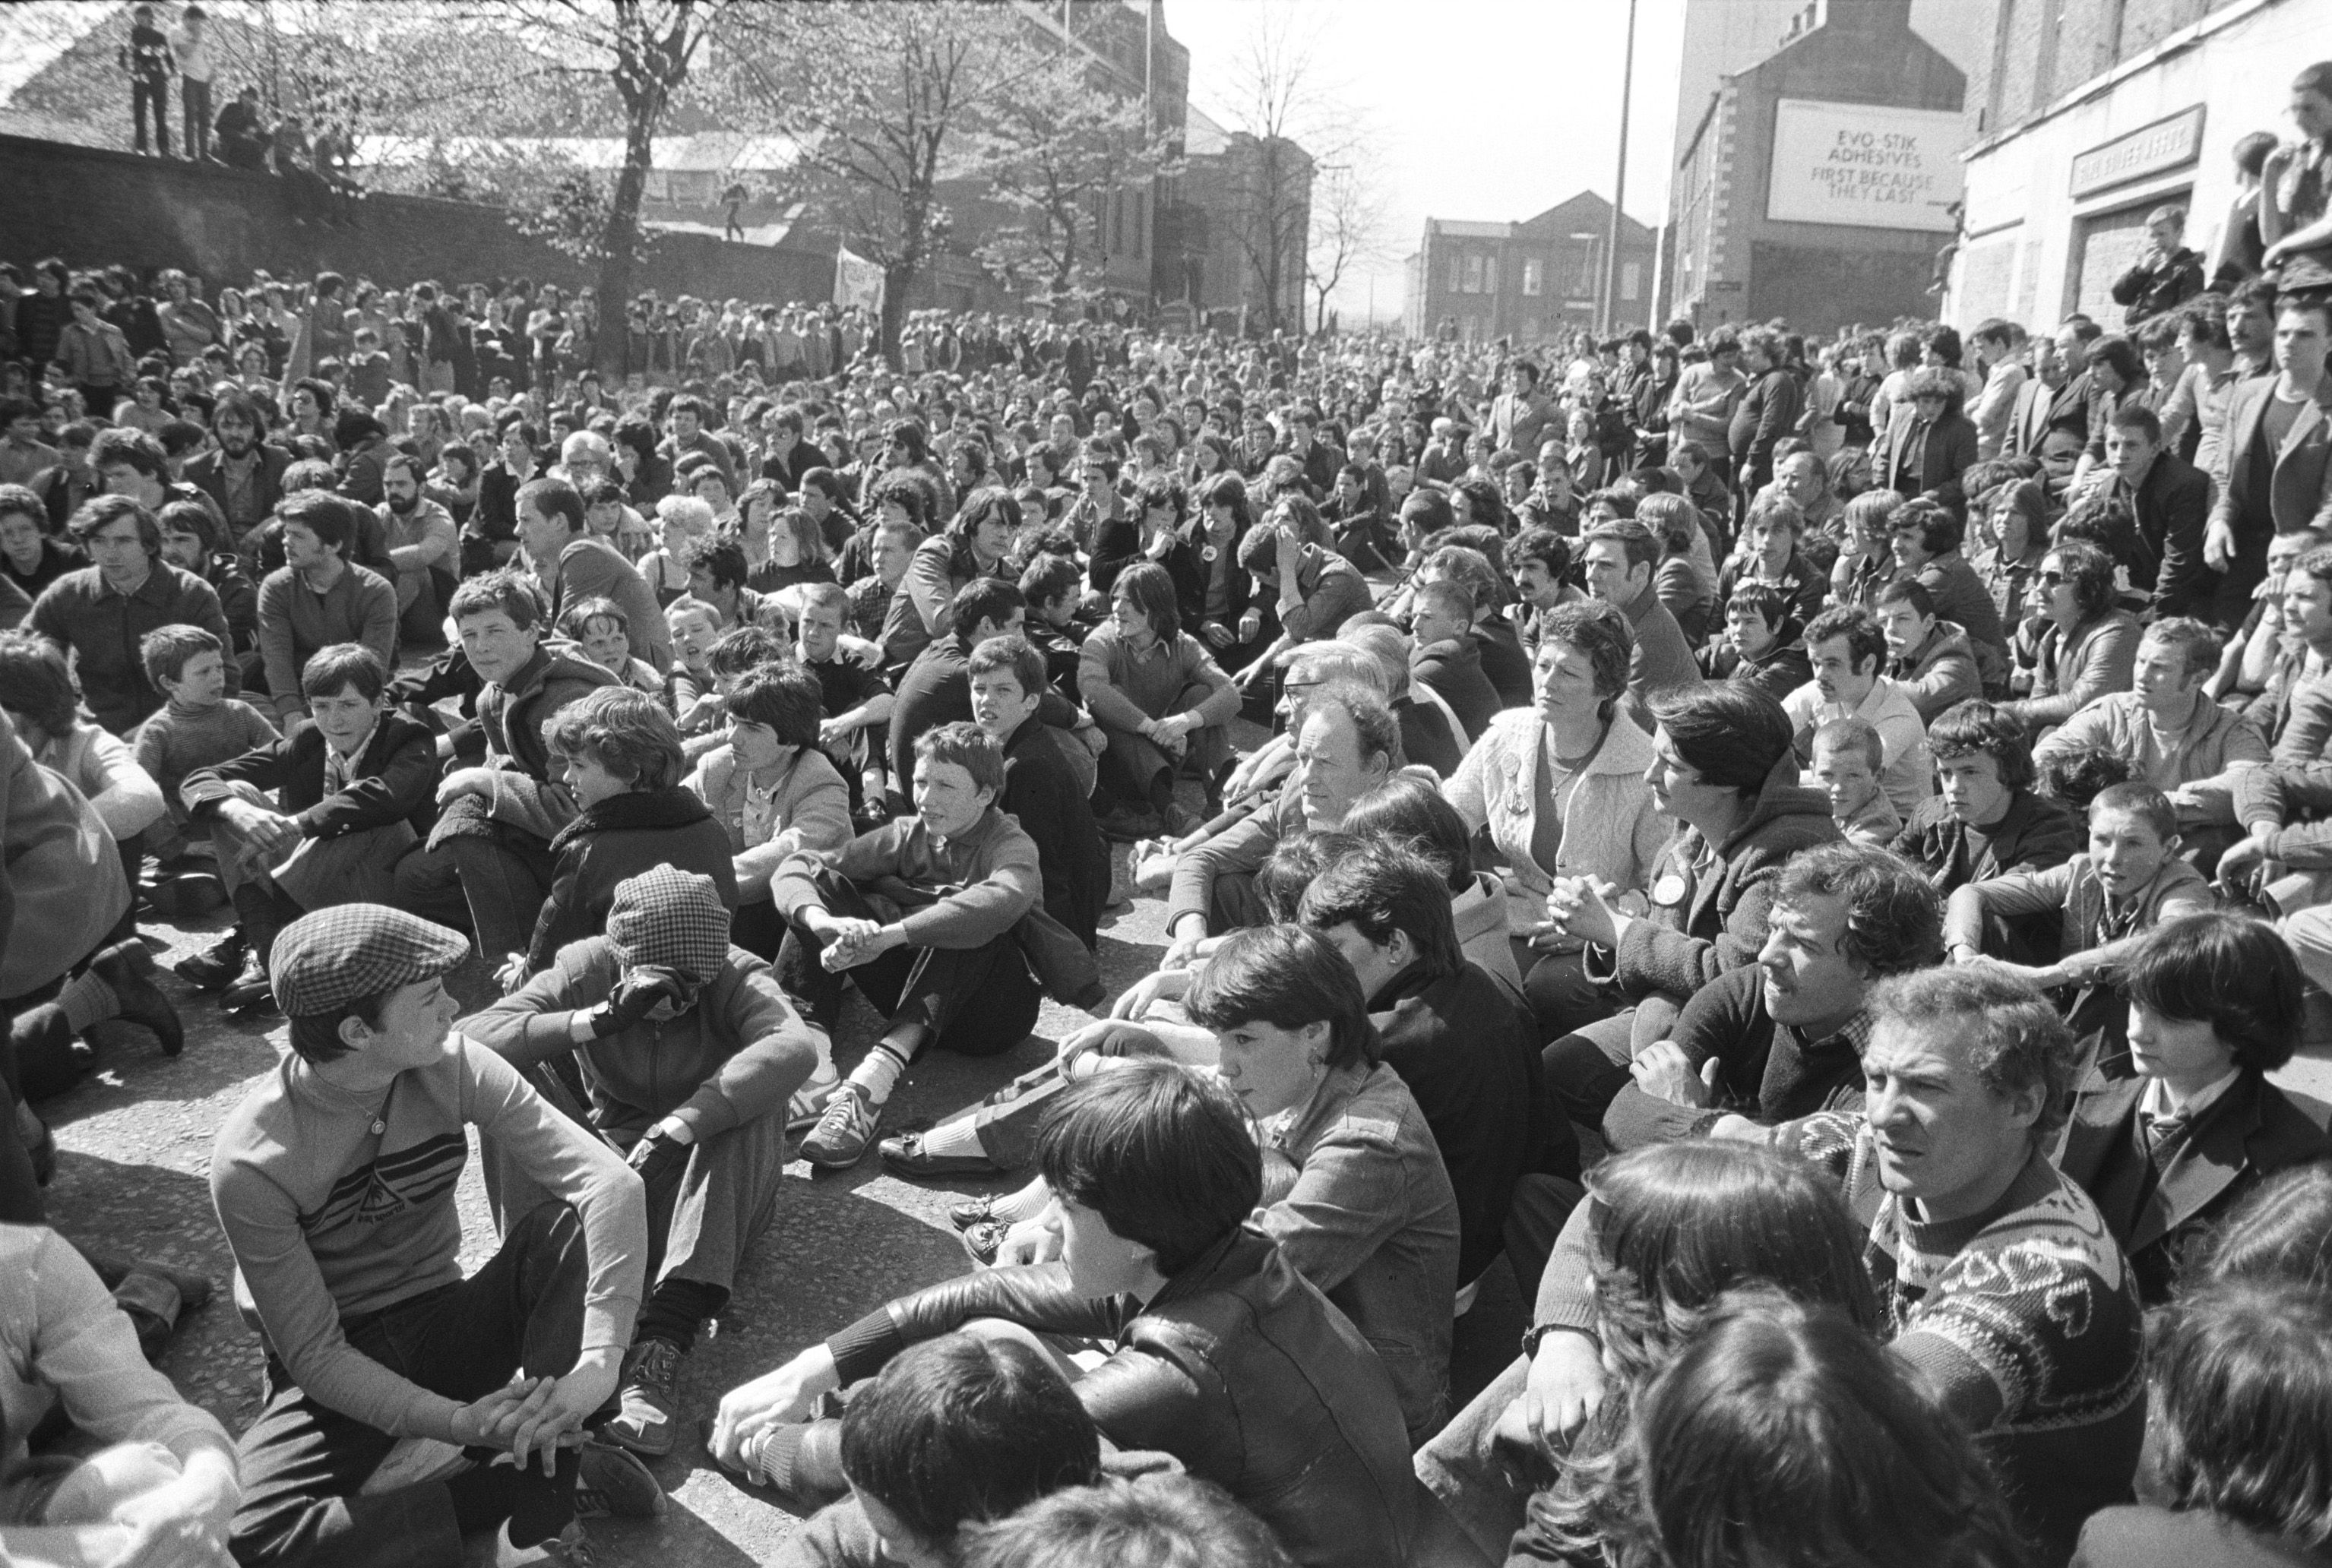 SOLIDARITY: Supporters of the hunger strikers stage a sit-down protest on 11 April 1981 after a march to back the prisoners was stopped at College Square East and prevented from reaching City Hall (all republican and nationalist demonstrations were banned